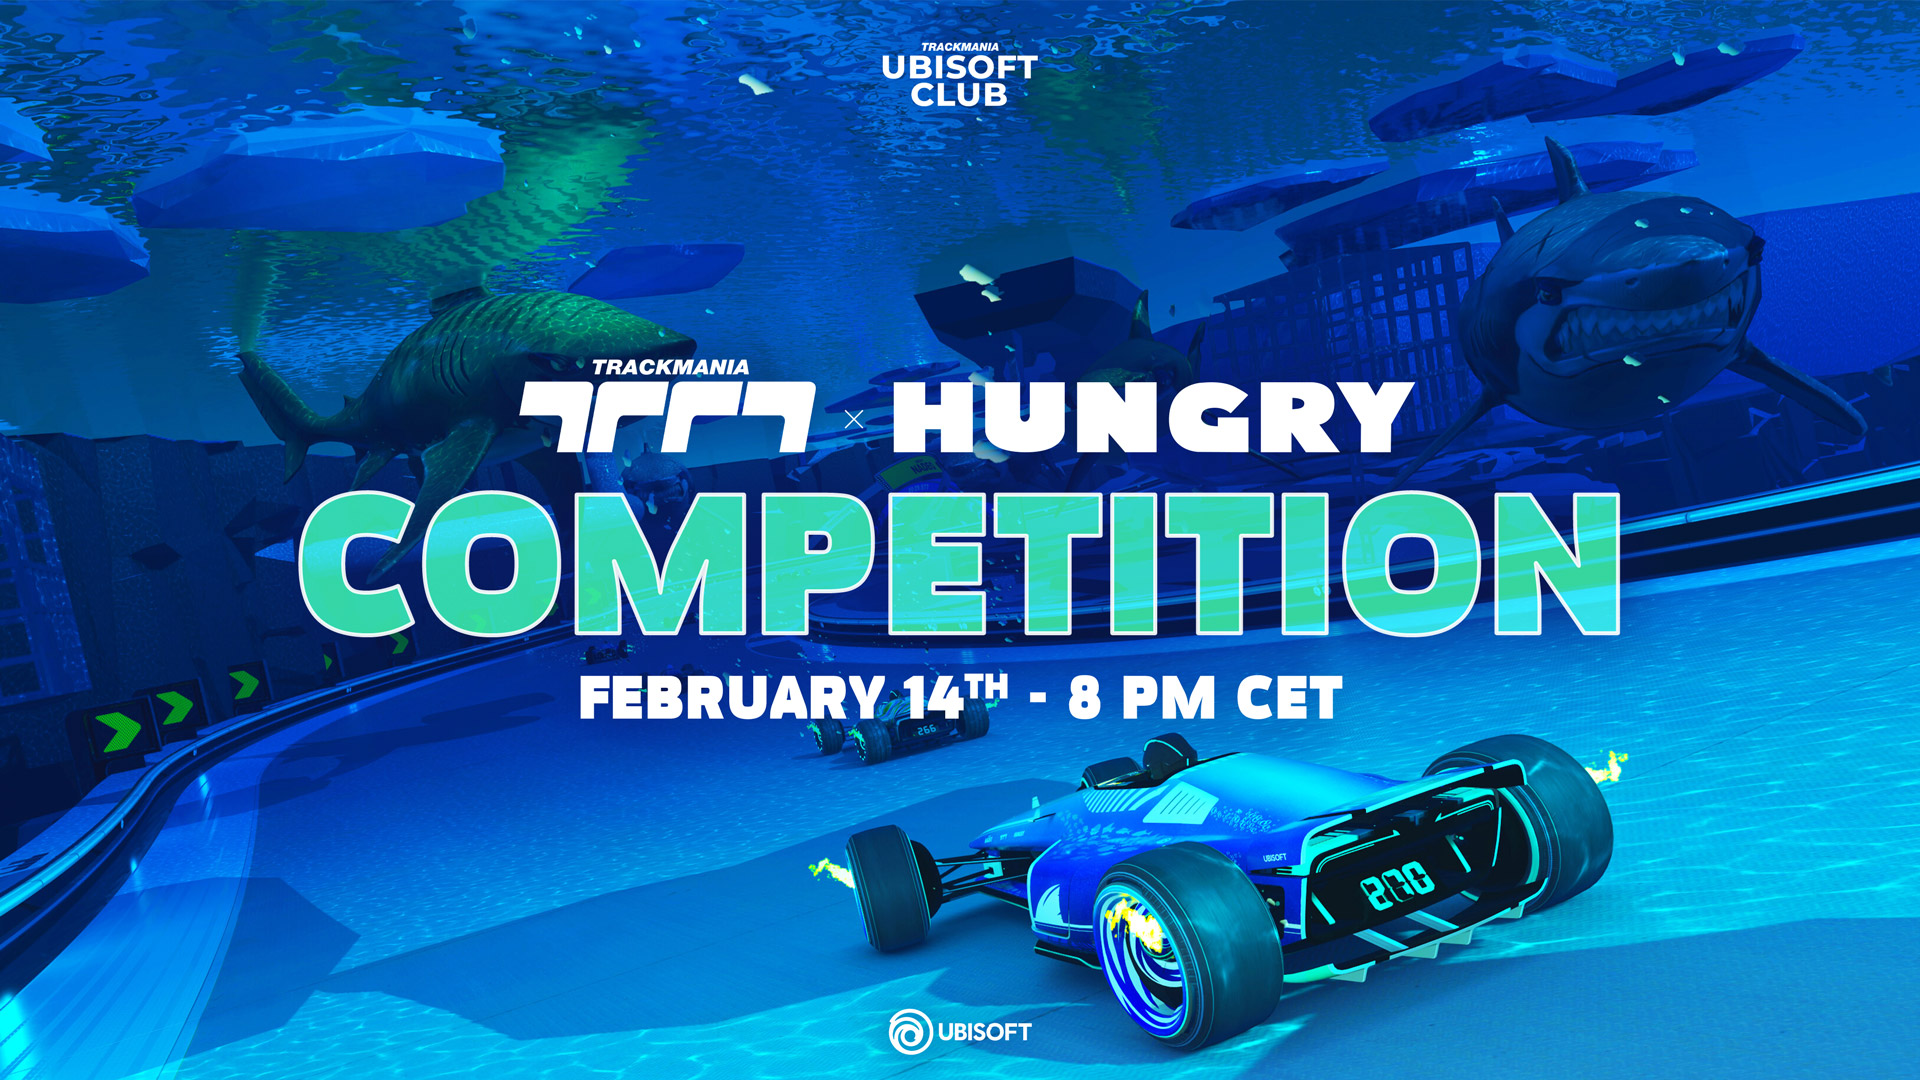 JOIN THE HUNGRY COMPETITIONS TO WIN SPECIAL REWARDS!